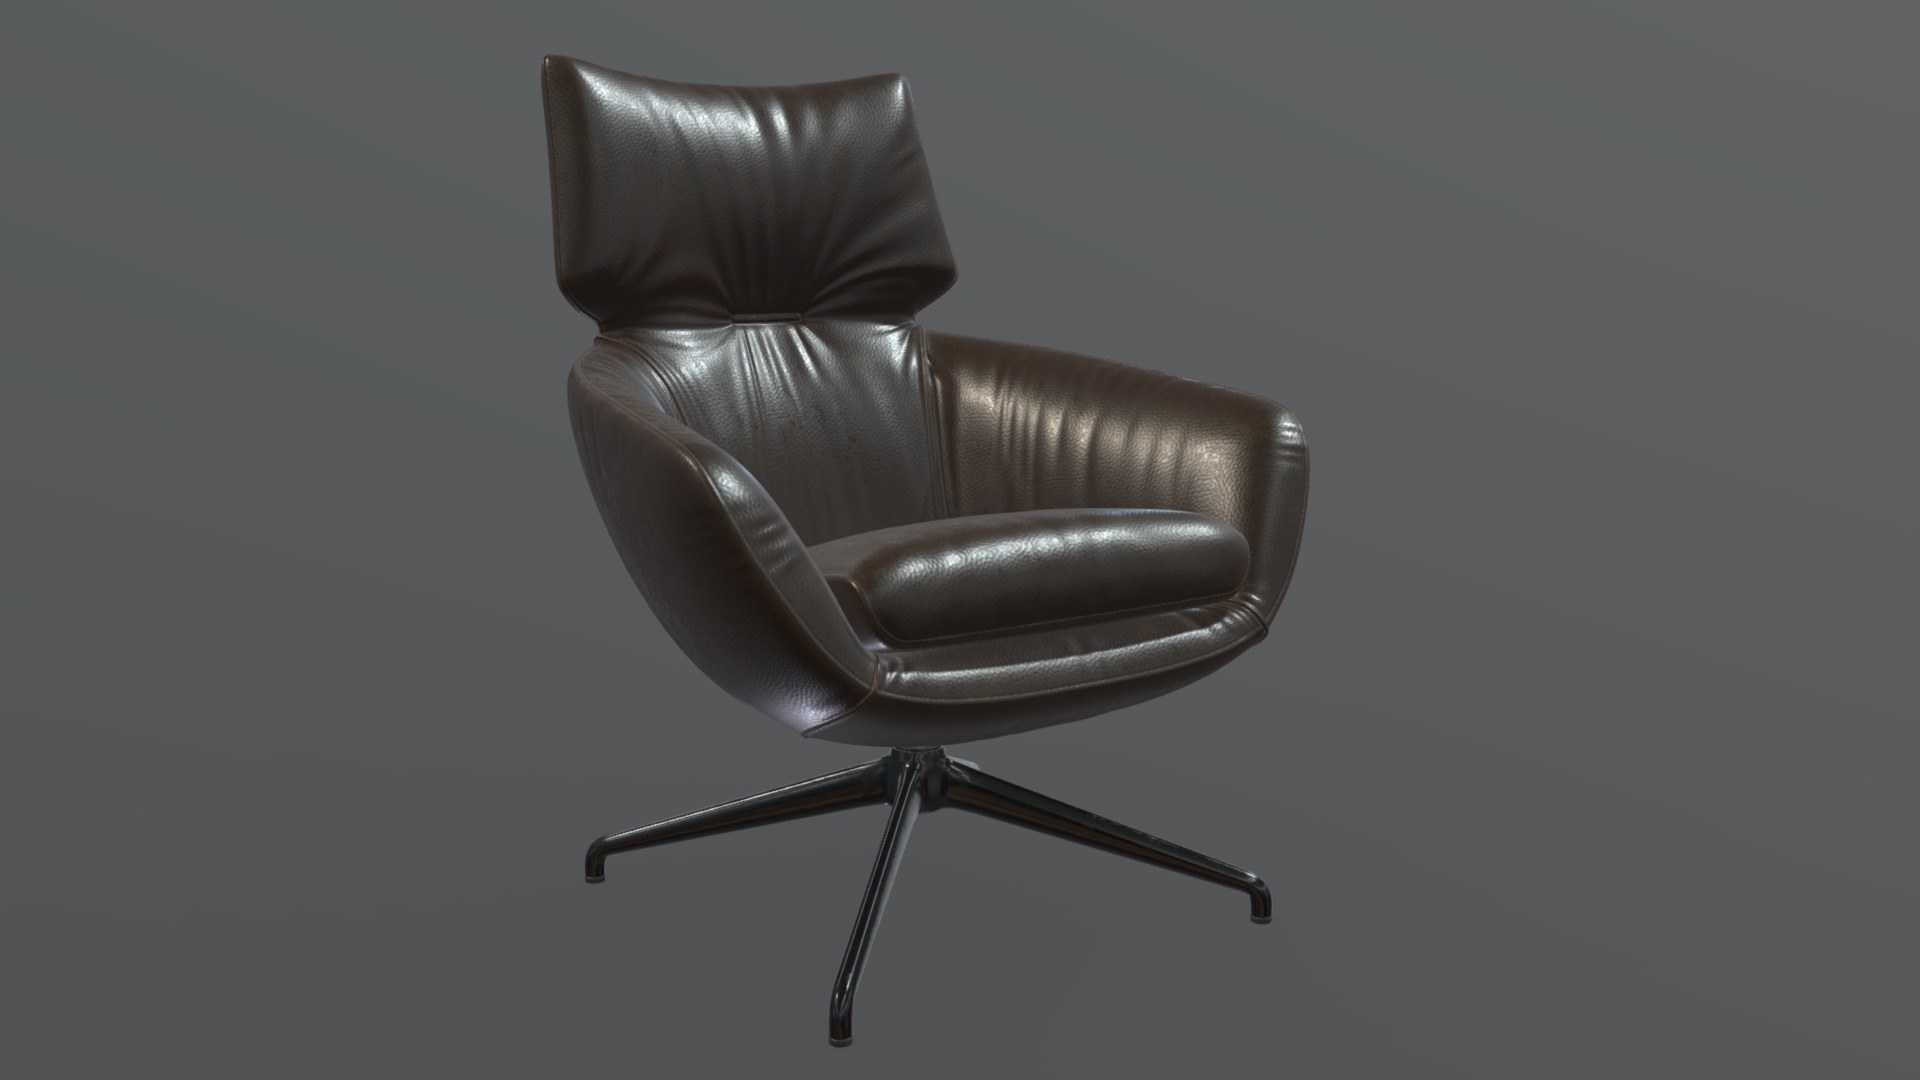 3D model LEOLUX LX LX694 - This is a 3D model of the LEOLUX LX LX694. The 3D model is about a black leather chair.